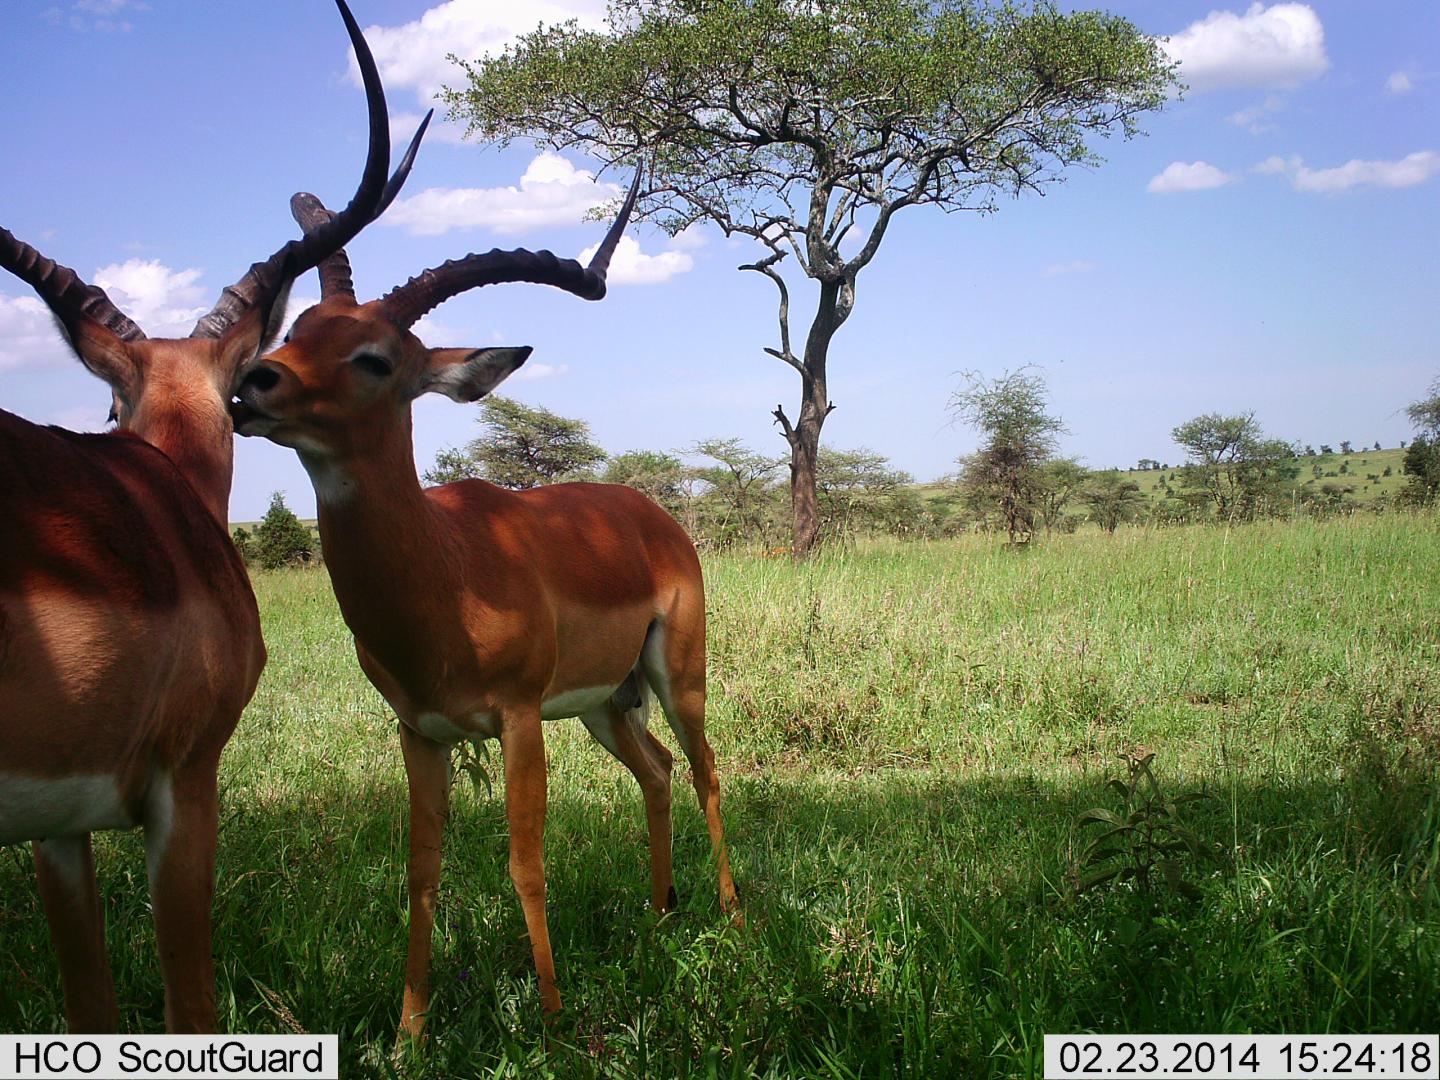 Motion sensor 'camera traps' unobtrusively take pictures of animals in their natural environment, oftentimes yielding images not otherwise observable. The artificial intelligence system automatically processes such images, here correctly reporting this as a picture of two impala standing. Source: Snapshot Serengeti